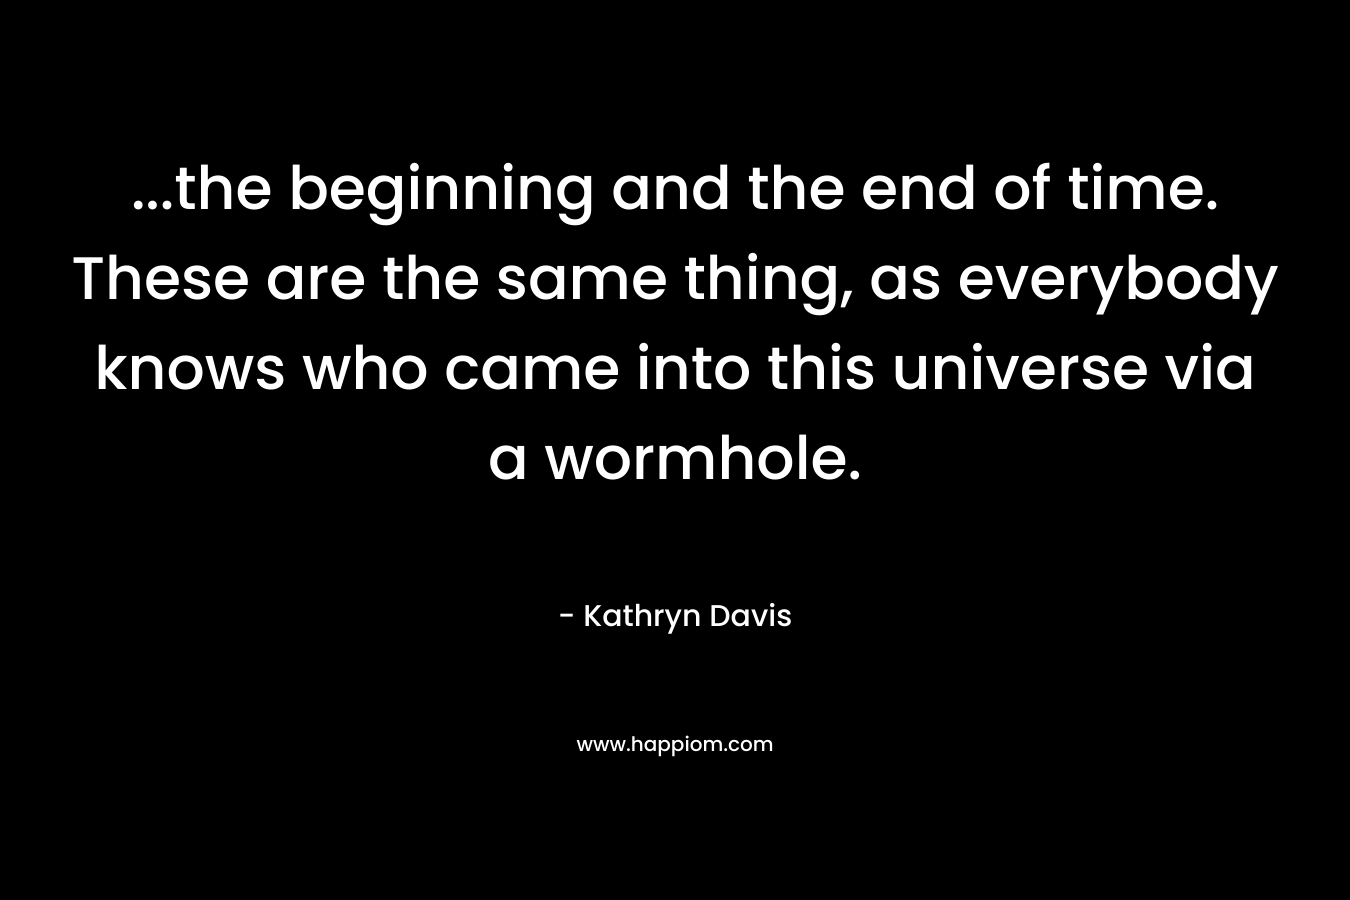 …the beginning and the end of time. These are the same thing, as everybody knows who came into this universe via a wormhole. – Kathryn Davis